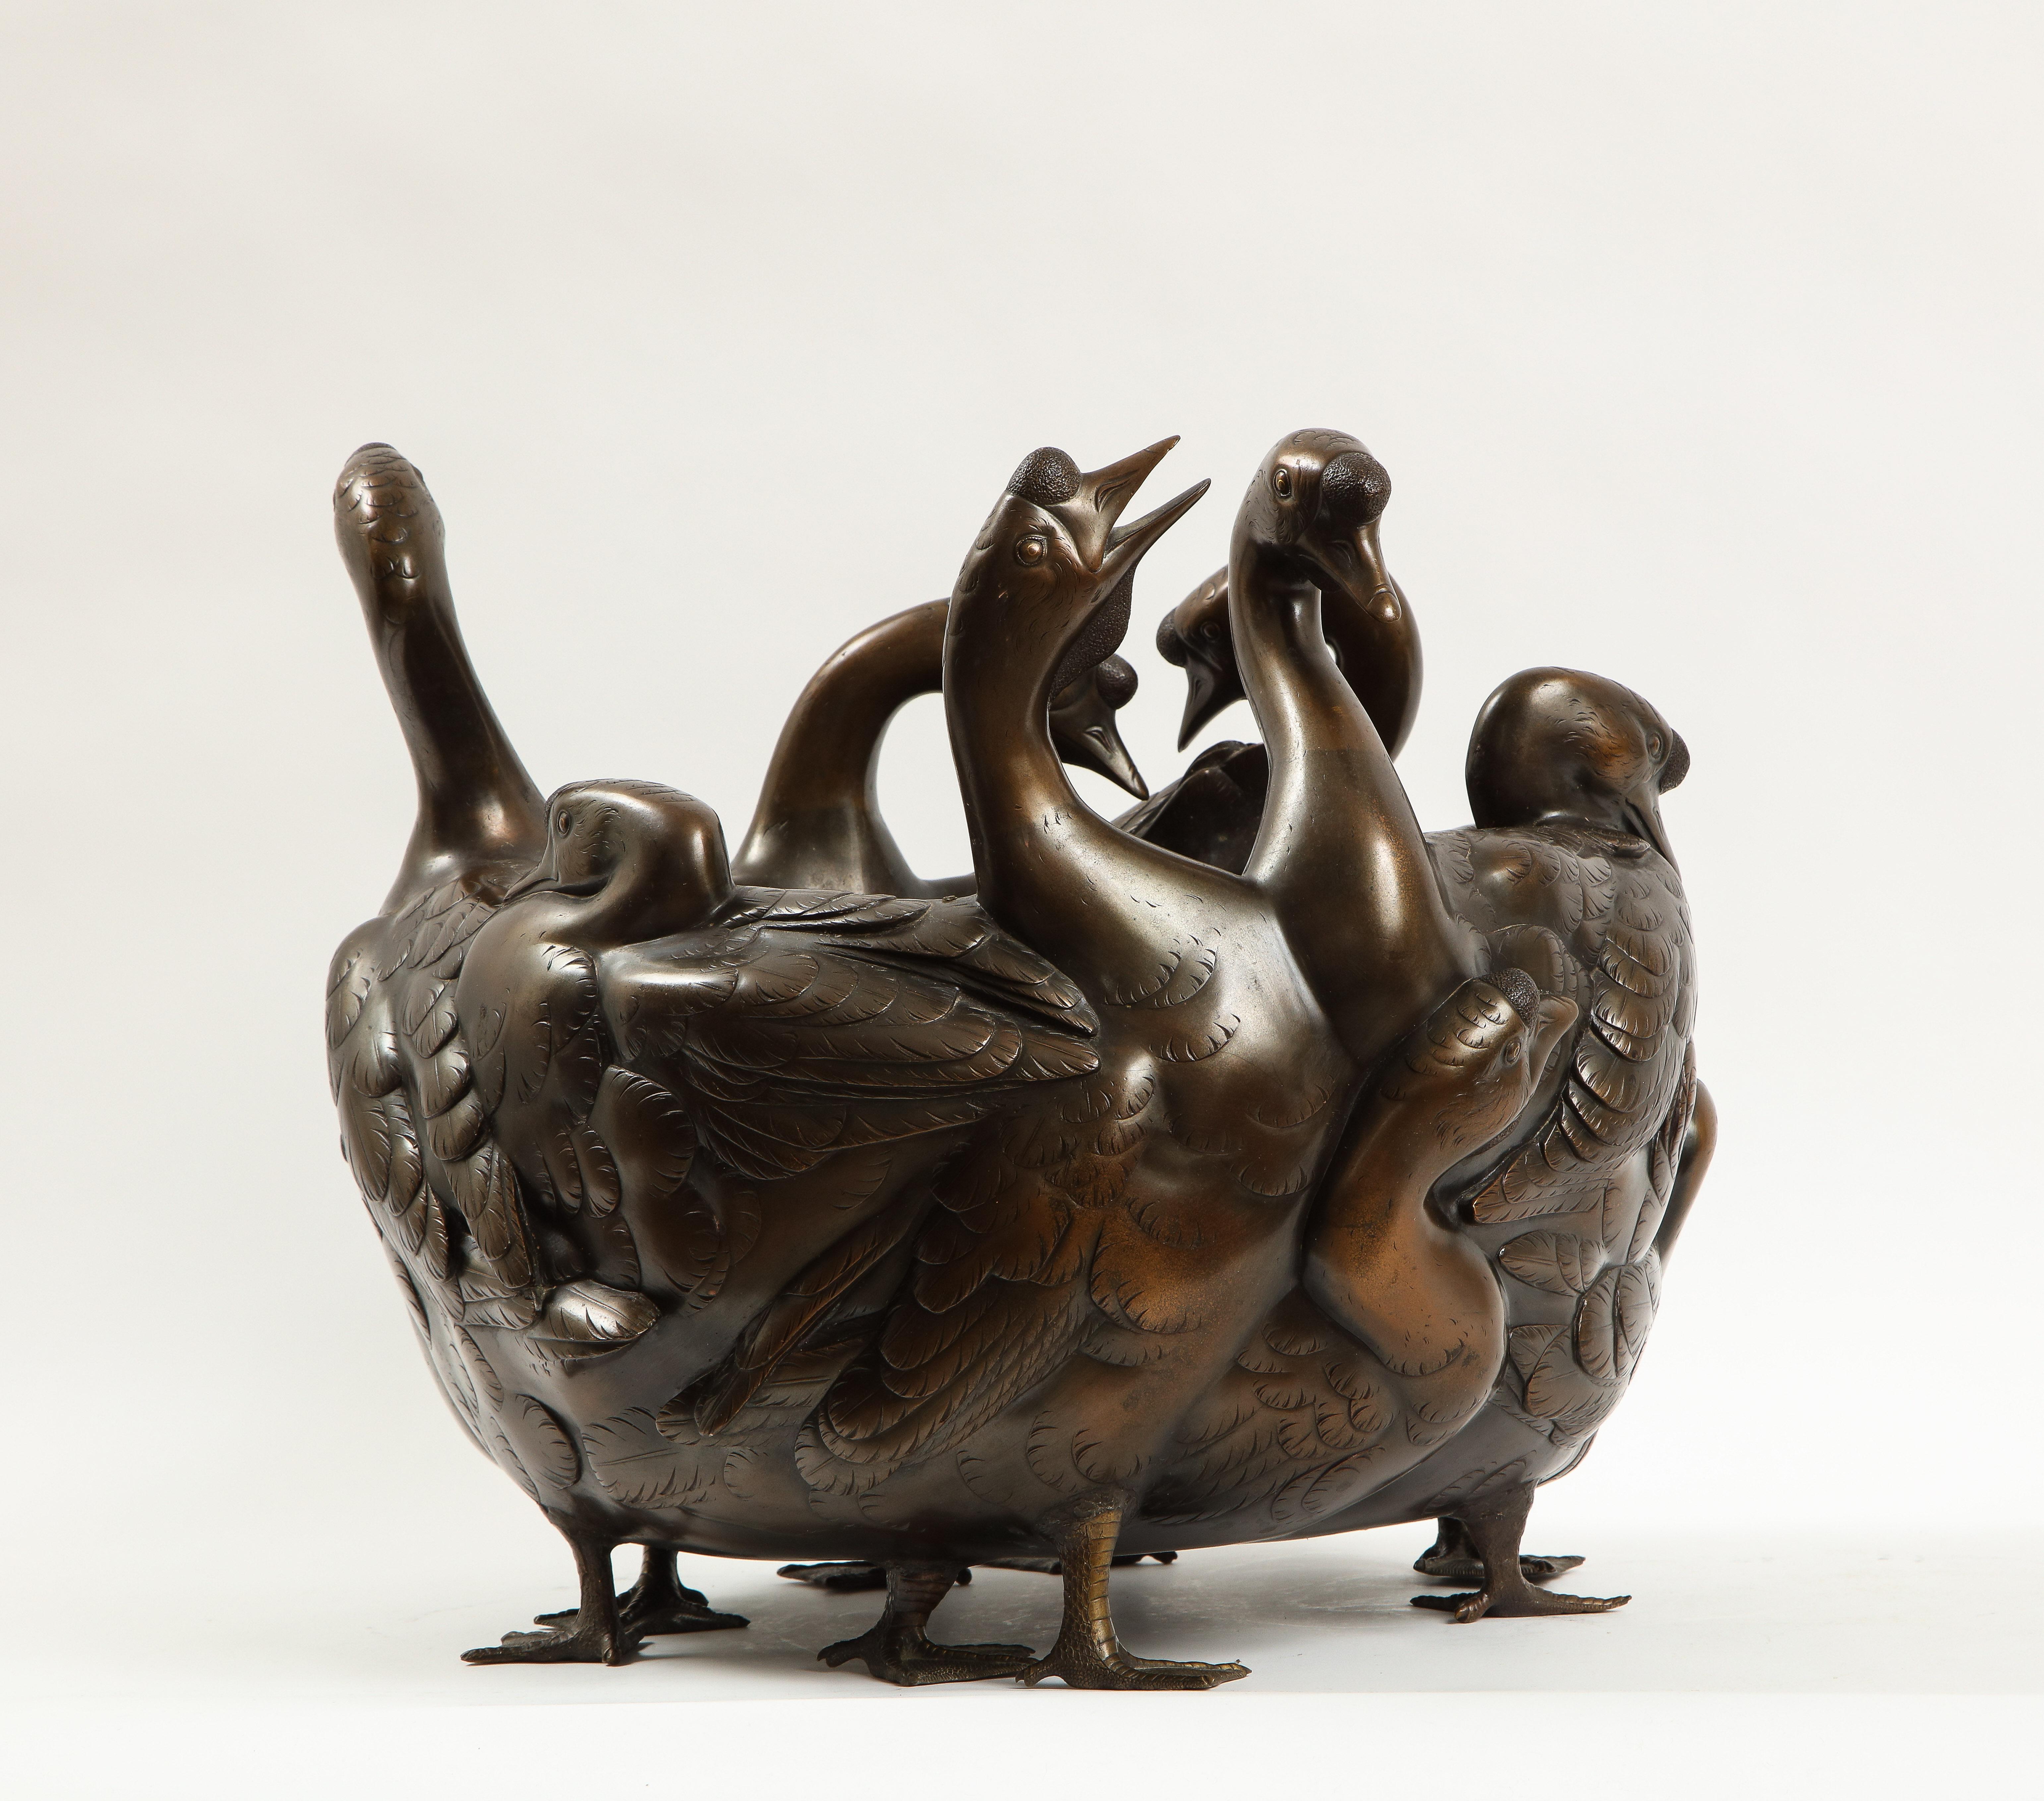 19th Century Meiji Period Rare Japanese Bronze Centerpiece of a Flock of Geese, Signed